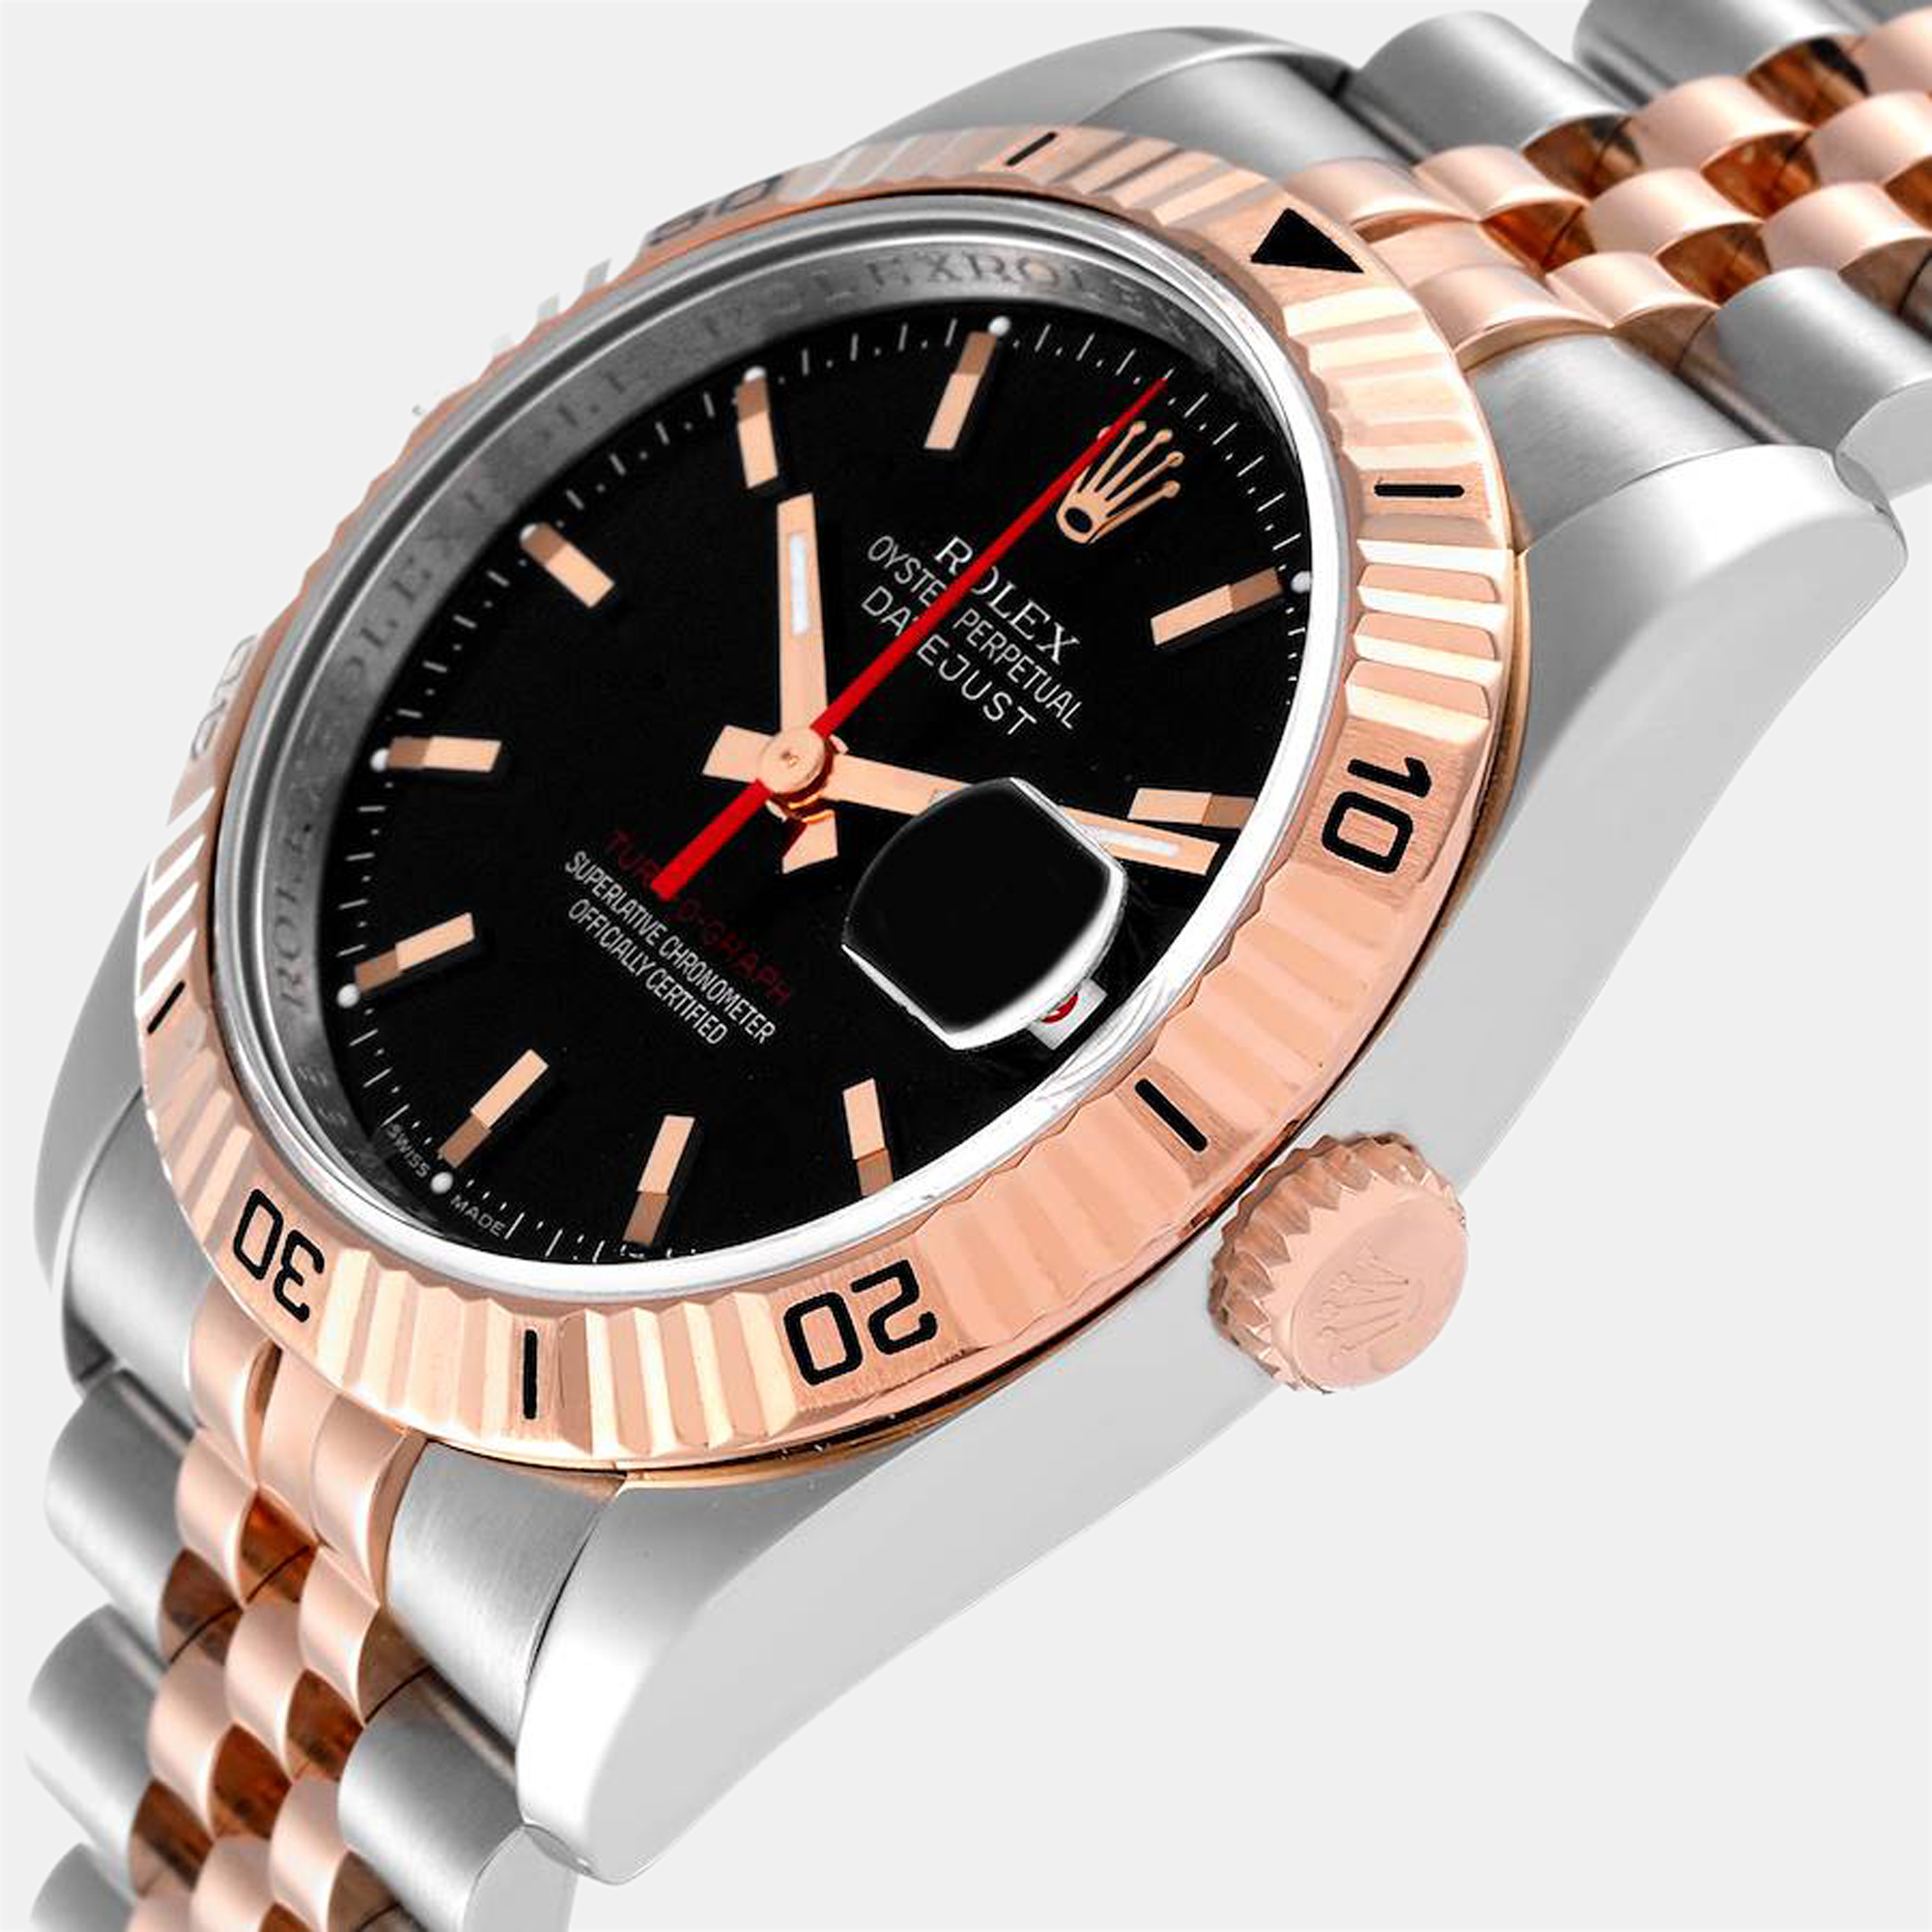 

Rolex Black 18K Rose Gold And Stainless Steel Datejust Turnograph 116261 Automatic Men's Wristwatch 36 mm